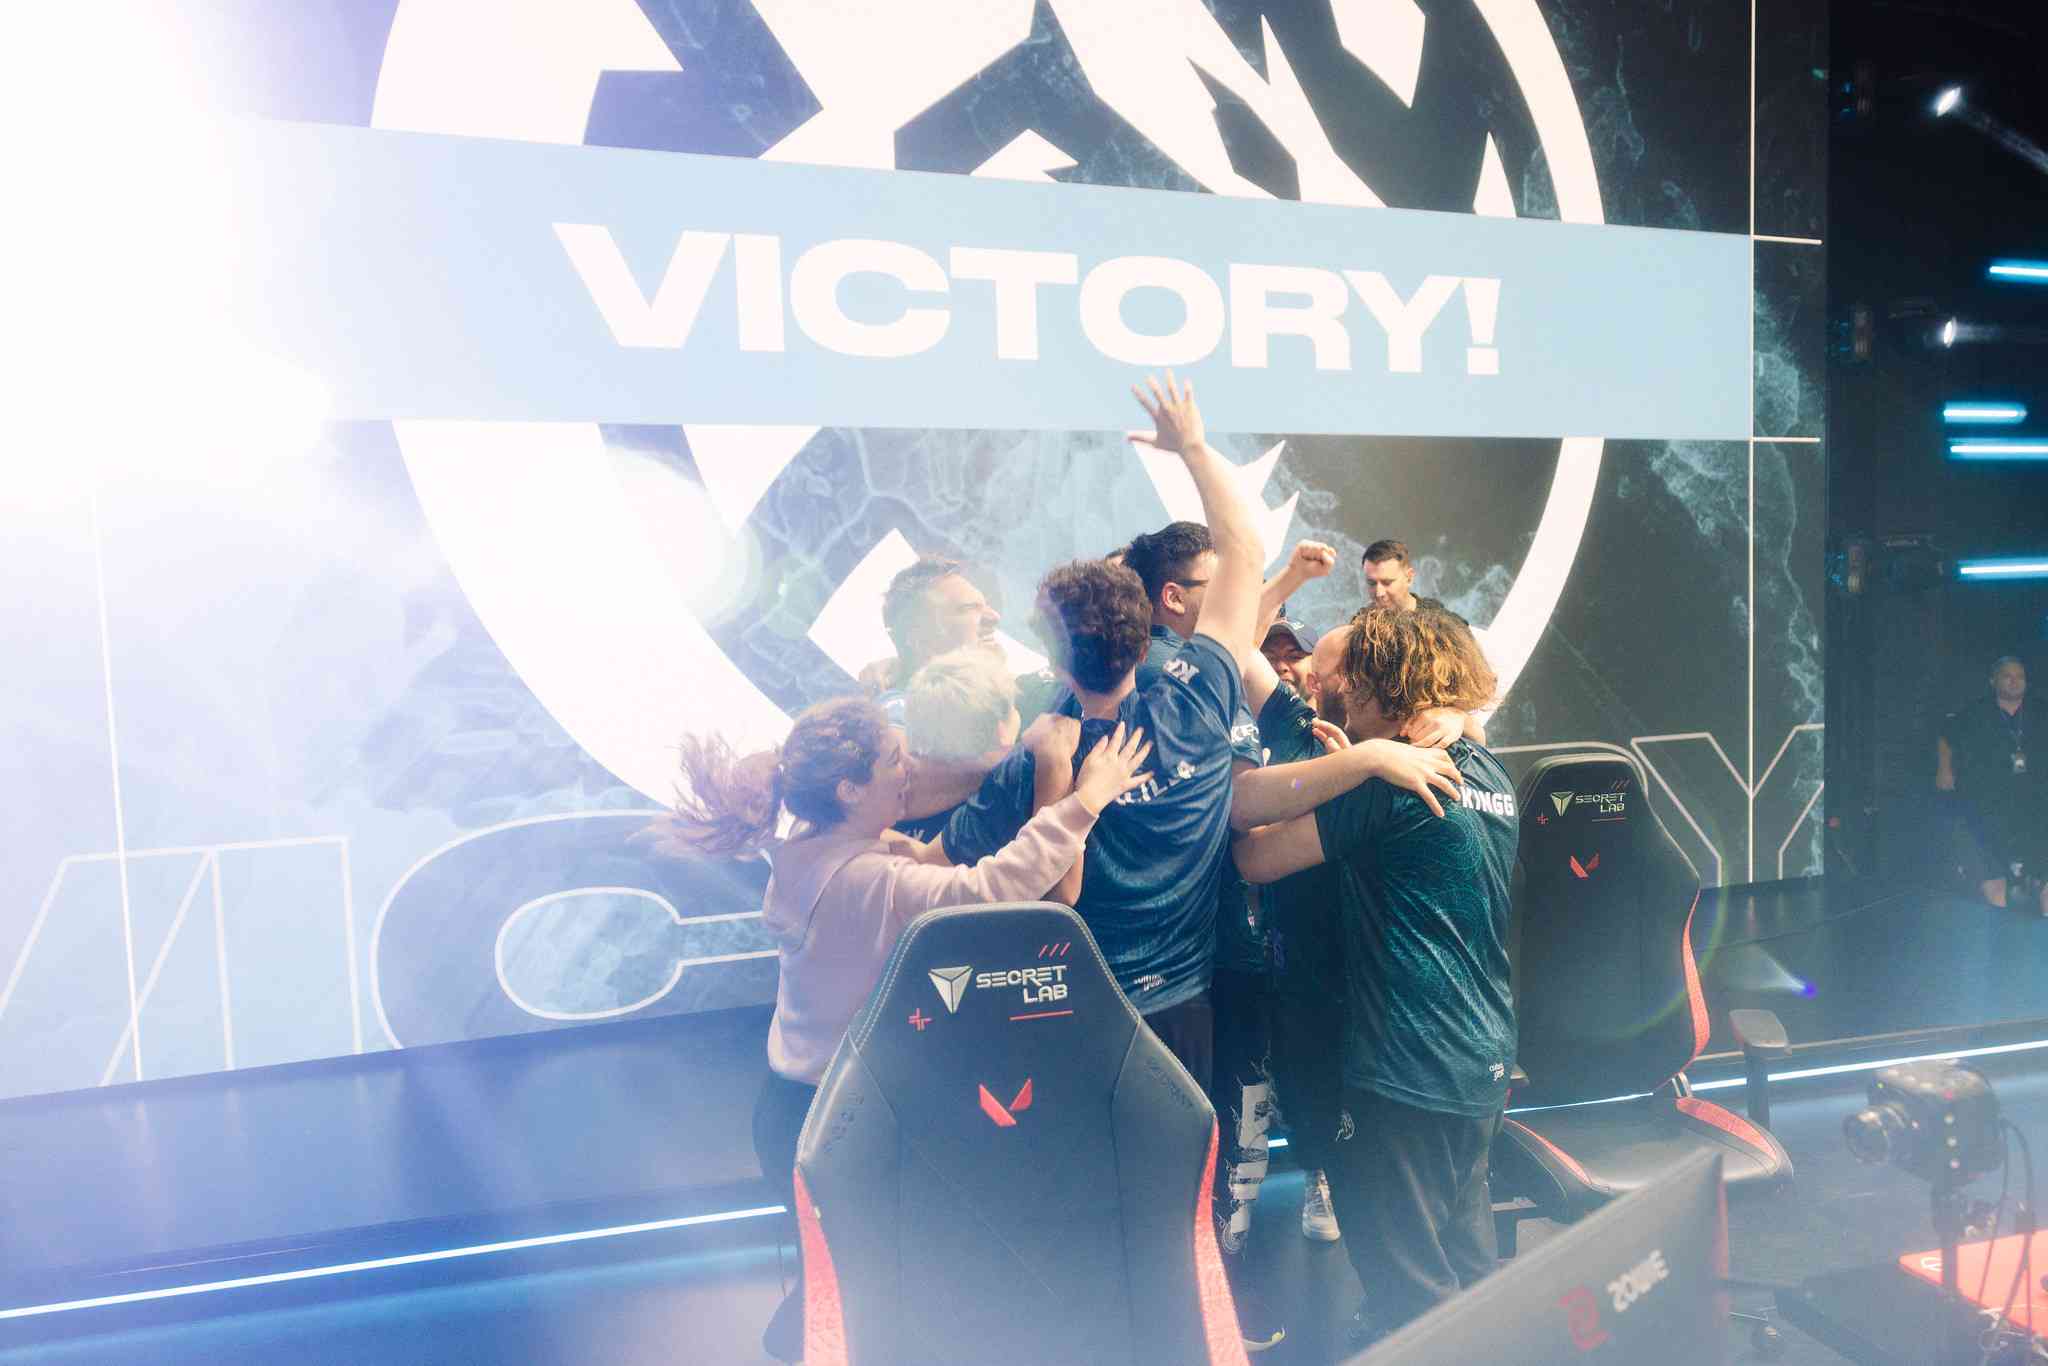 In spite of history, Leviatan reverse swept C9 to reach the grand finals of the LCQ (Image Credits: Tina Jo/Riot Games)